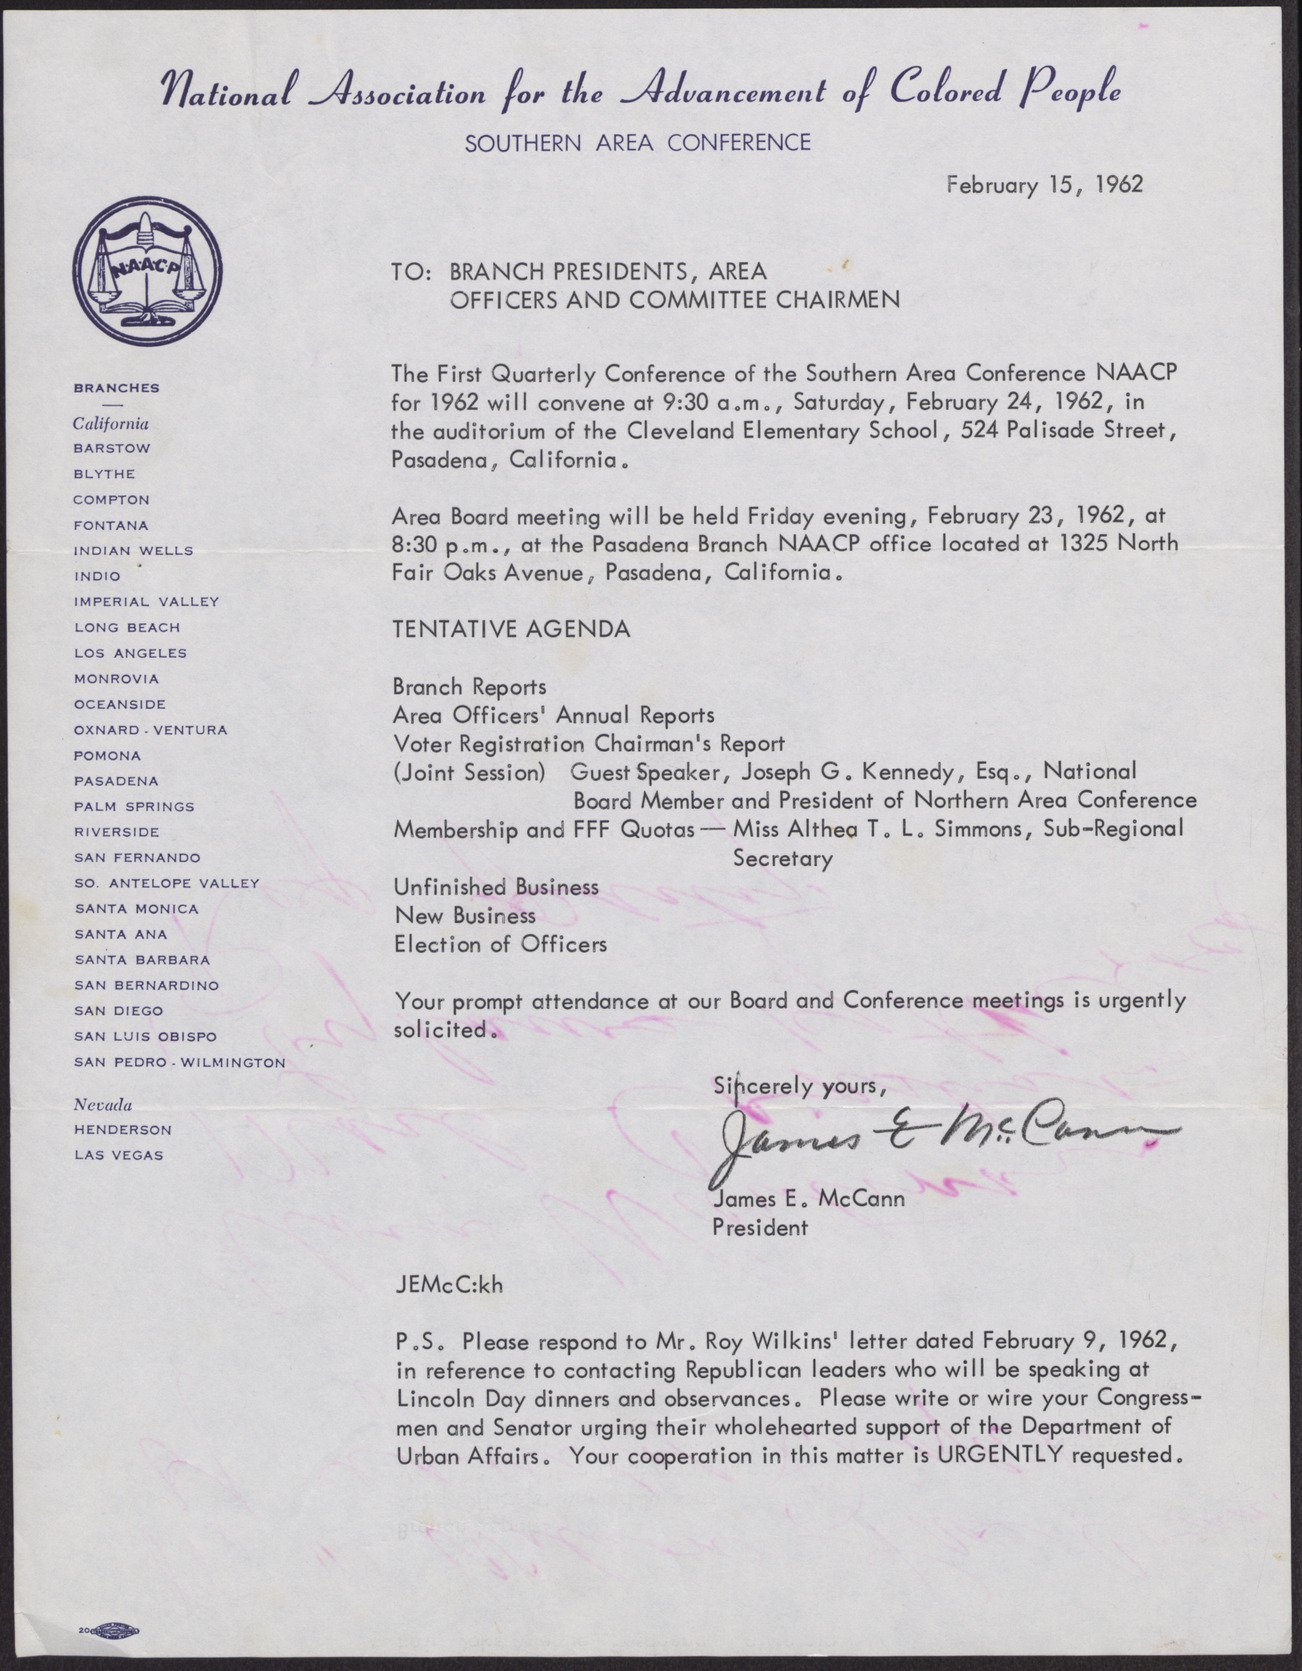 Letter to NAACP Branch Presidents, Area Officers, and Committee Chairmen from James E. McCann, February 15, 1962